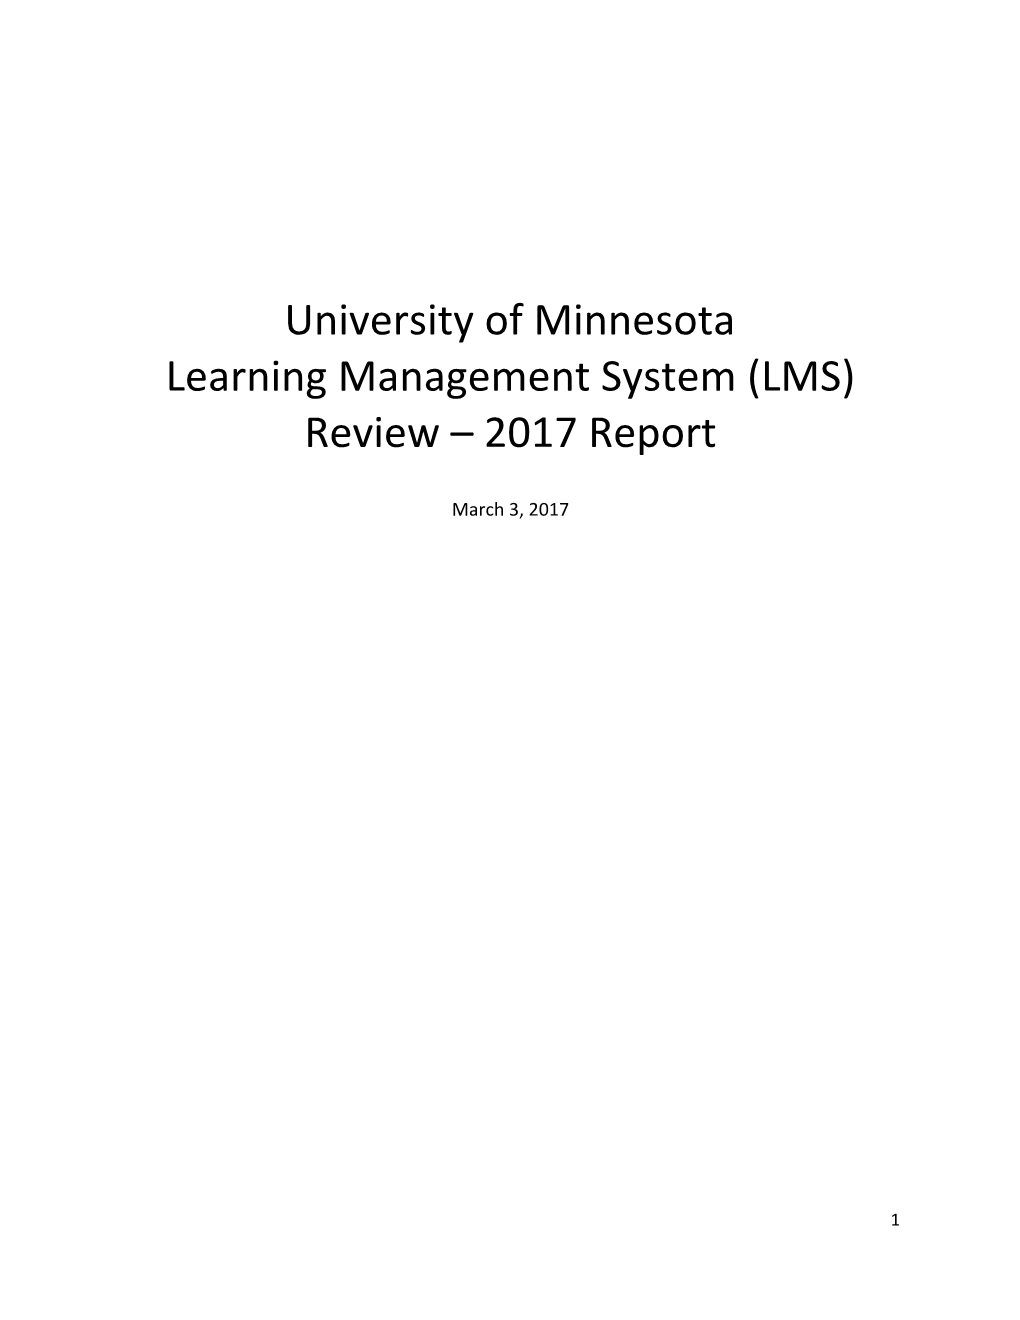 University of Minnesota Learning Management System (LMS) Review – 2017 Report